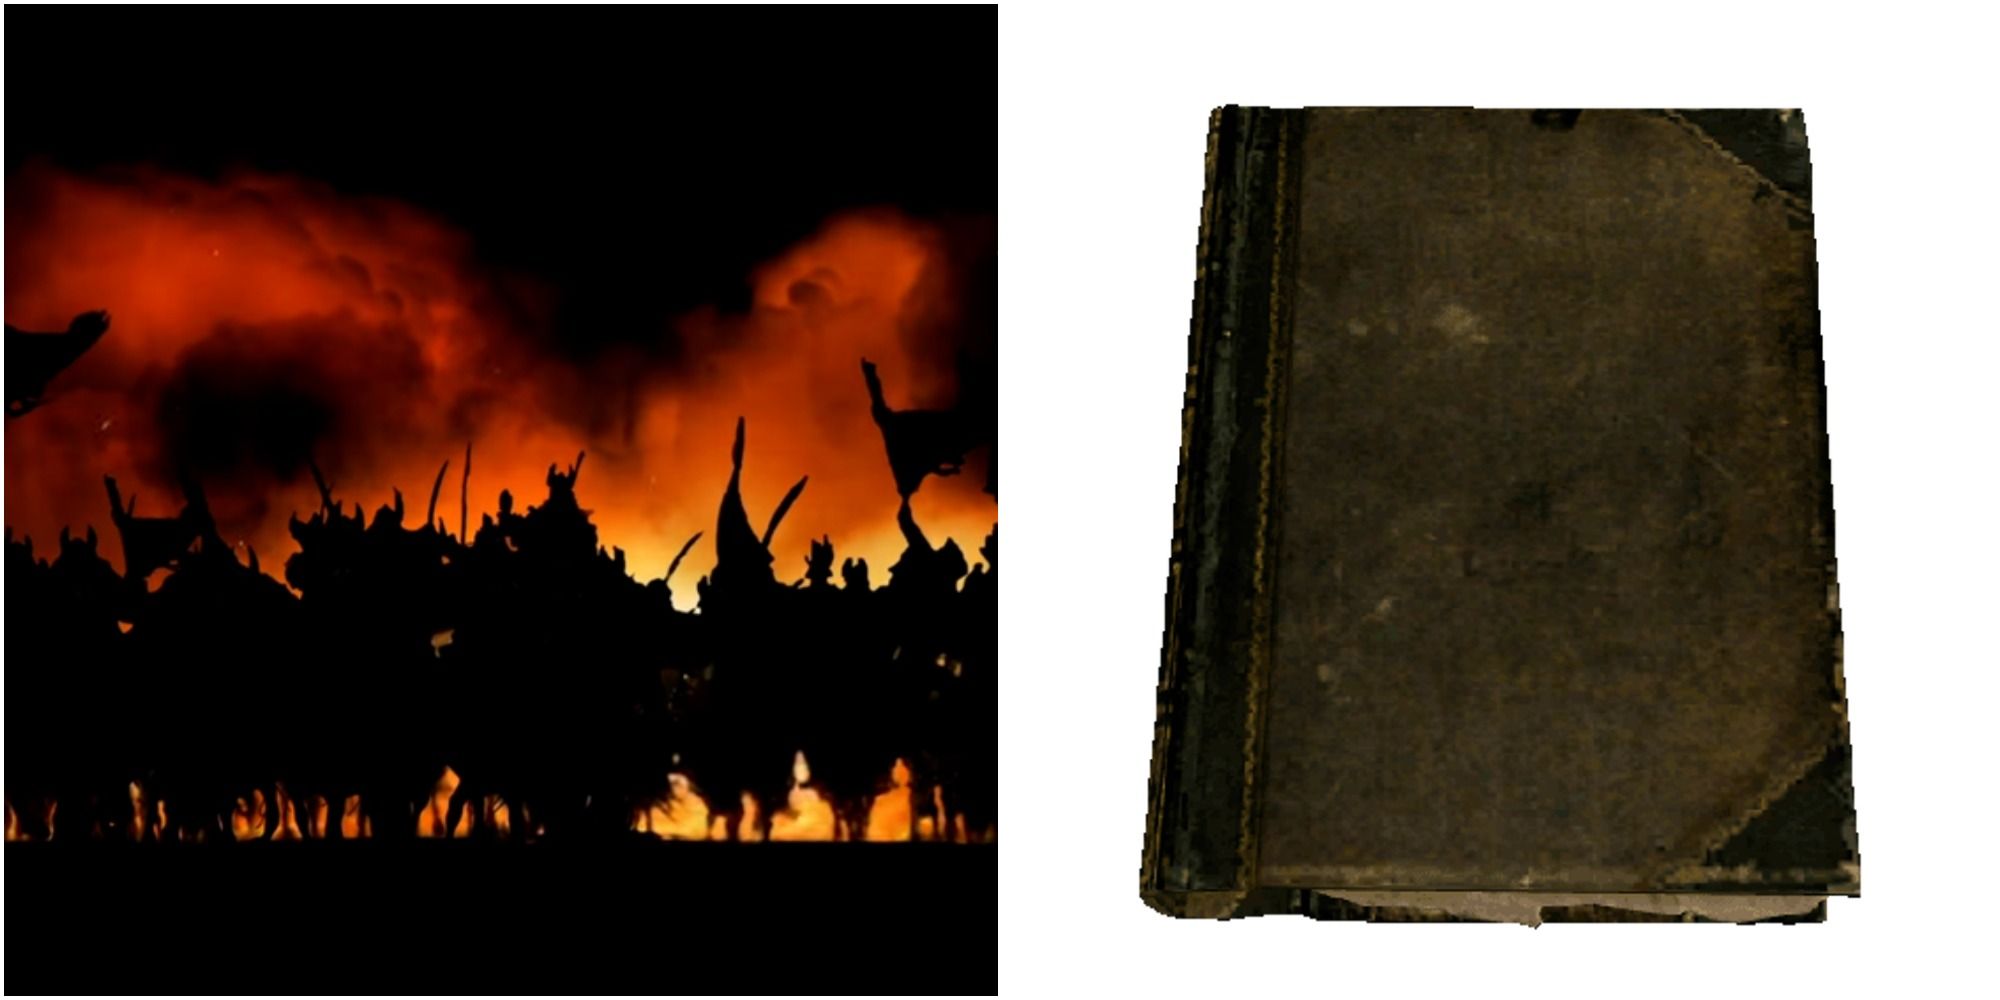 The Great War book to the right and the actual great war to the left Skyrim